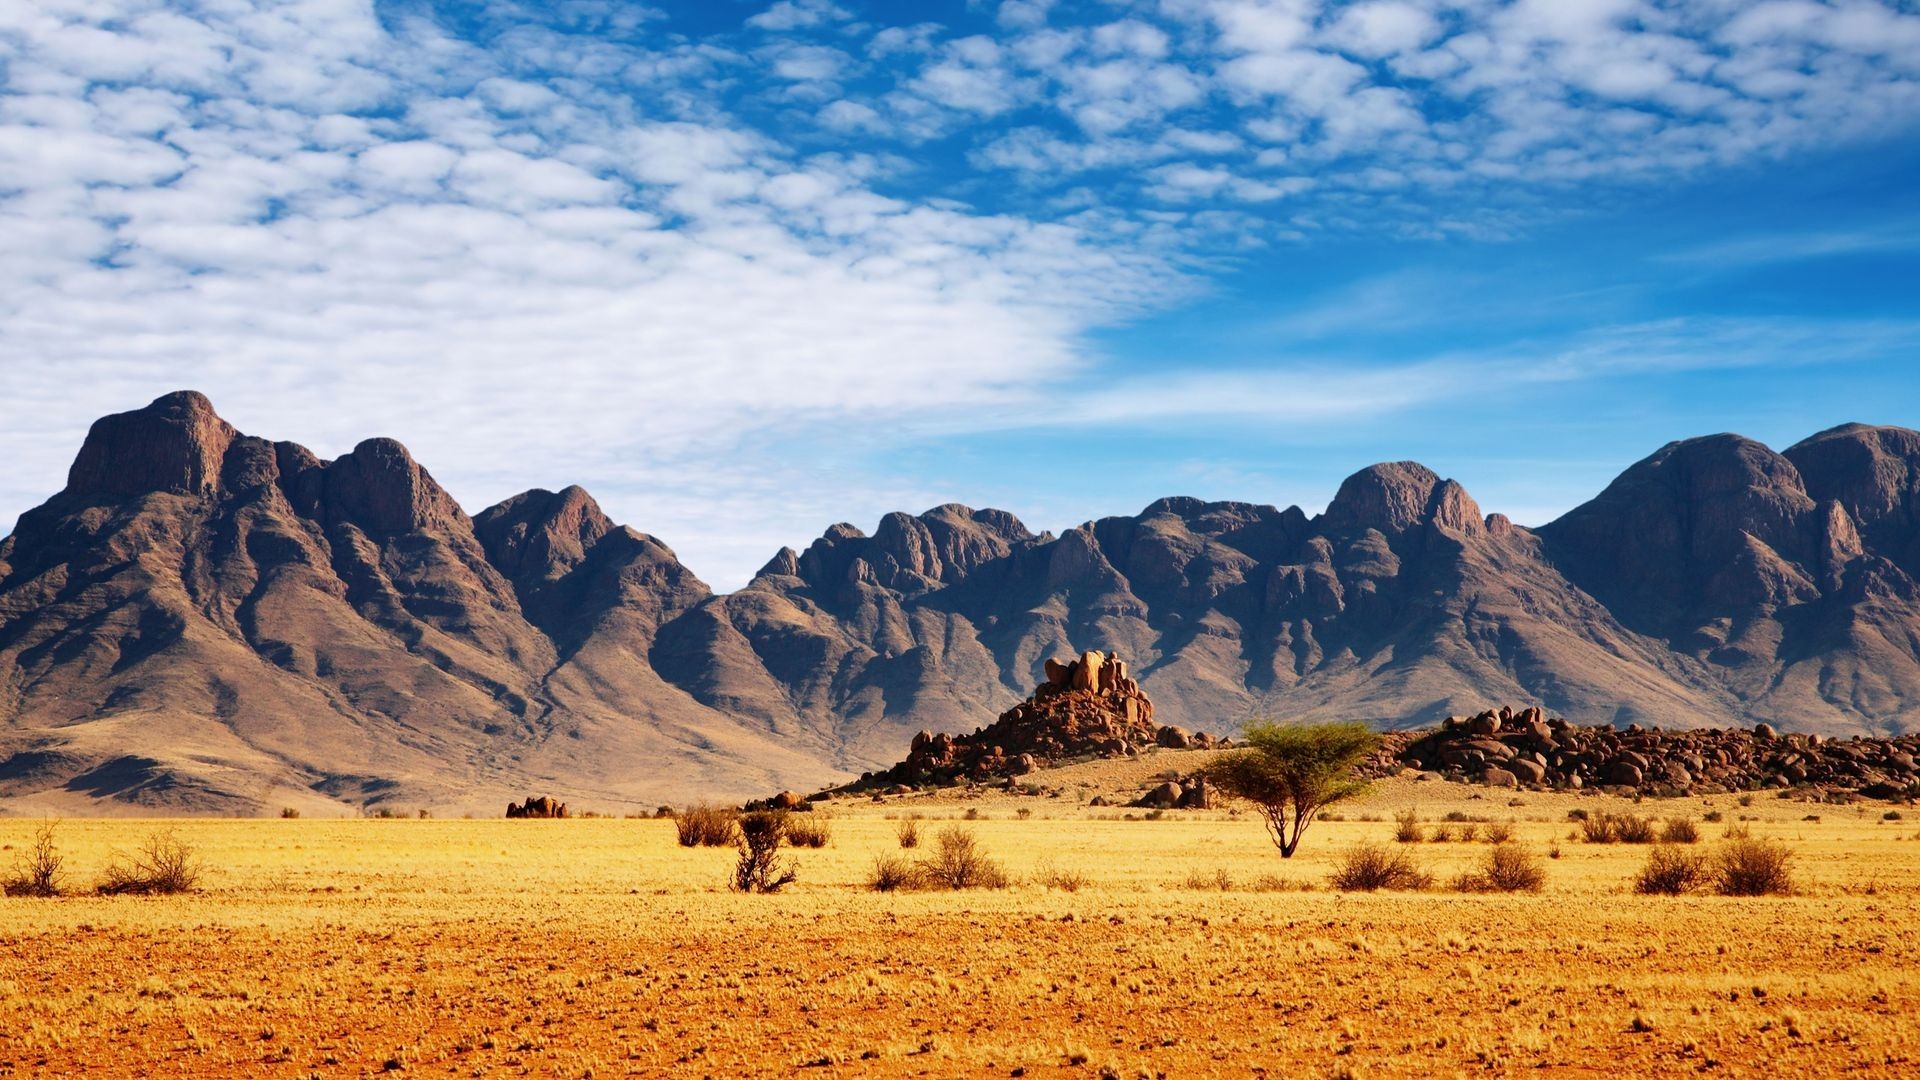 General 1920x1080 nature landscape mountains clouds Namibia Africa desert rocks trees stones plants